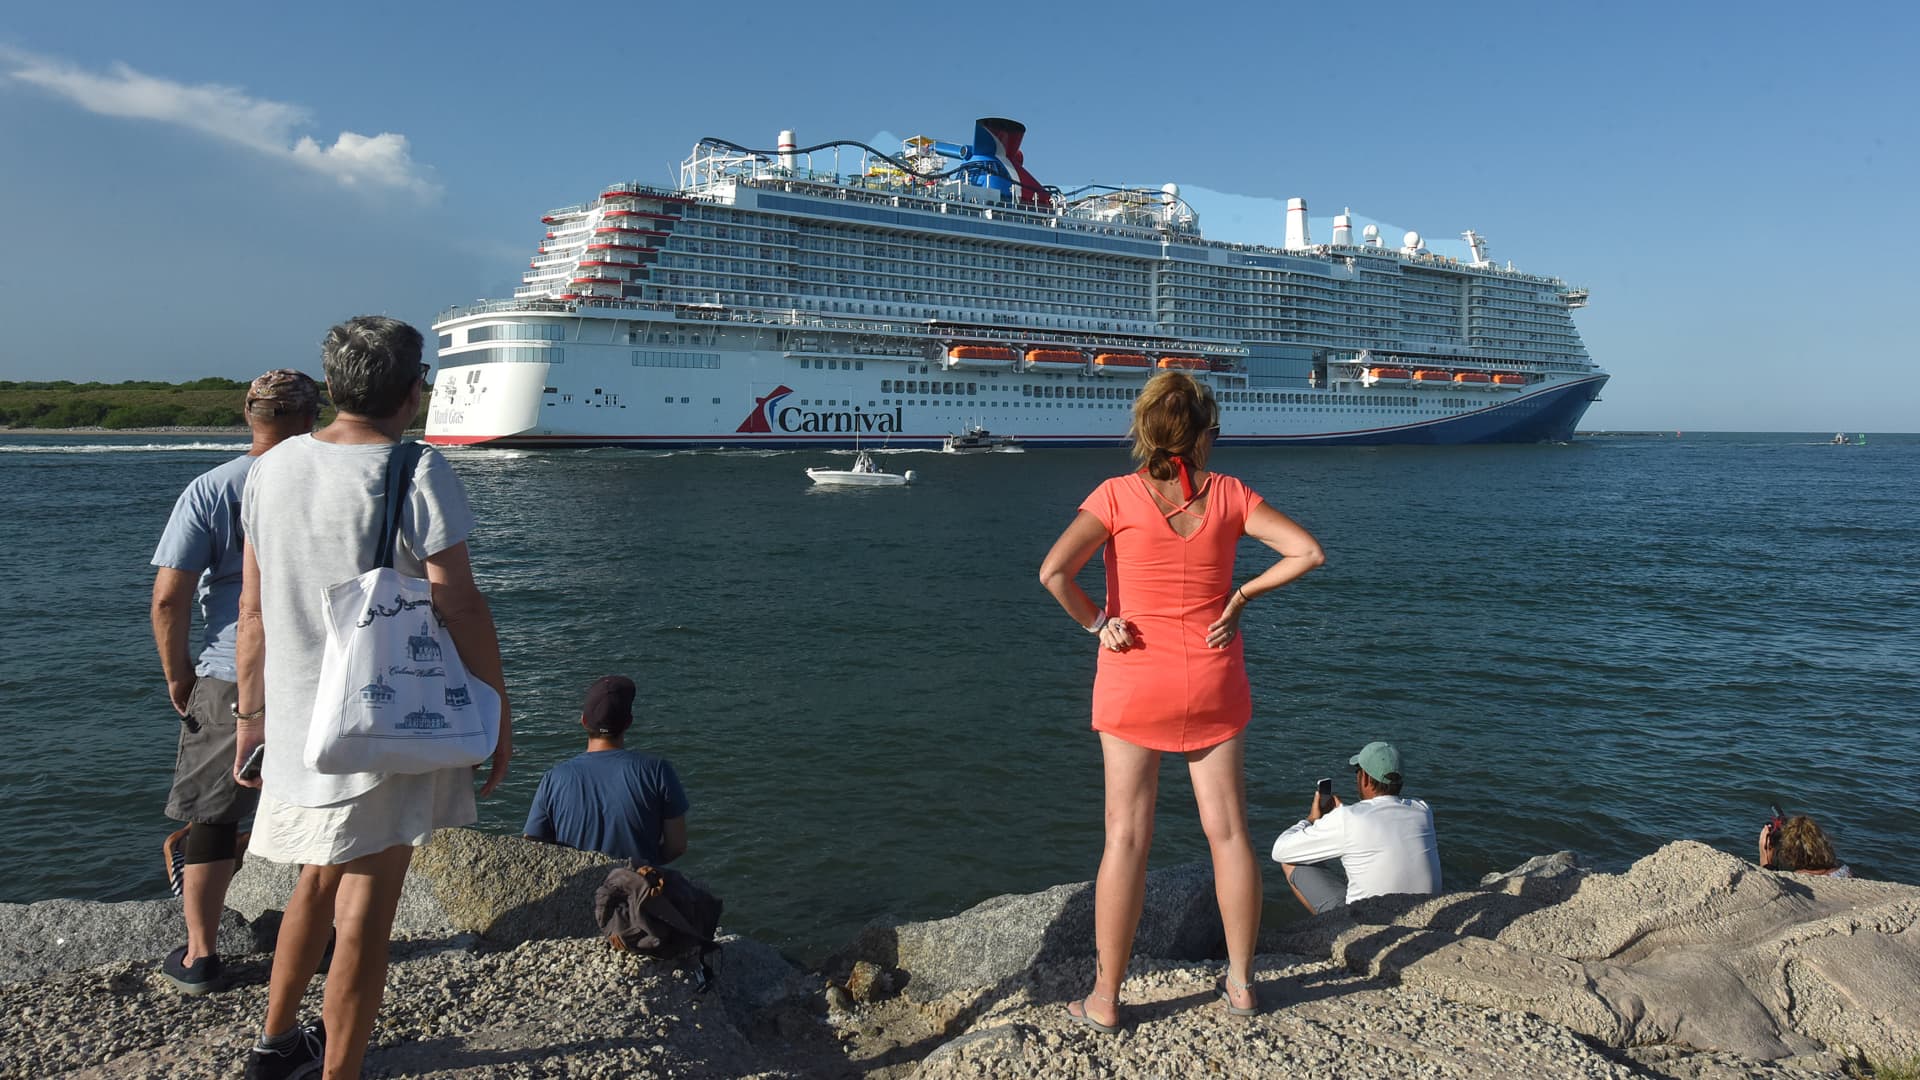 Cruise lines’ stocks fall after Fed rate hike raises concerns about debt, recession